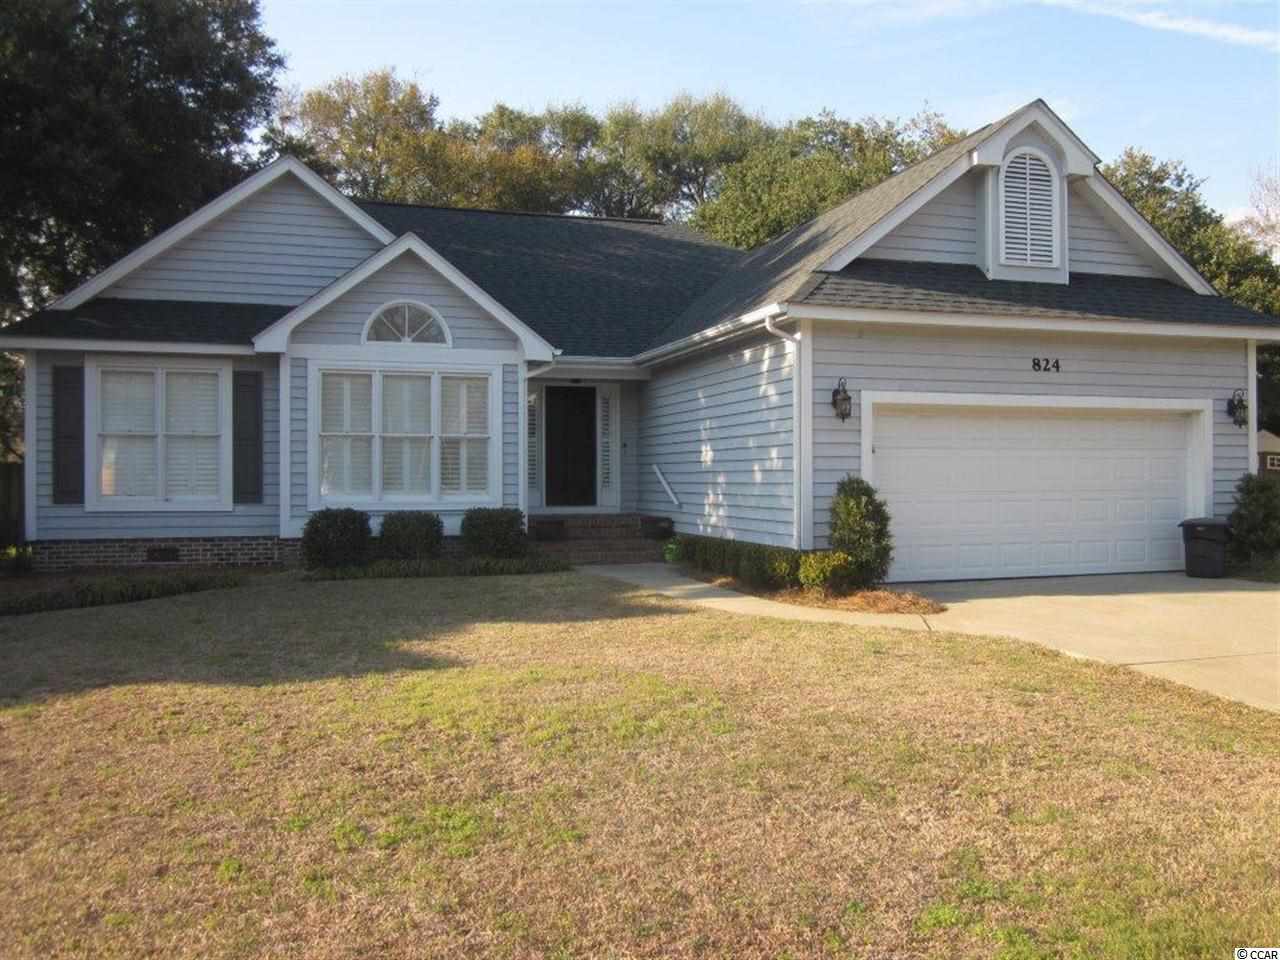 824 Mount Gilead Place Dr. Murrells Inlet, SC 29576